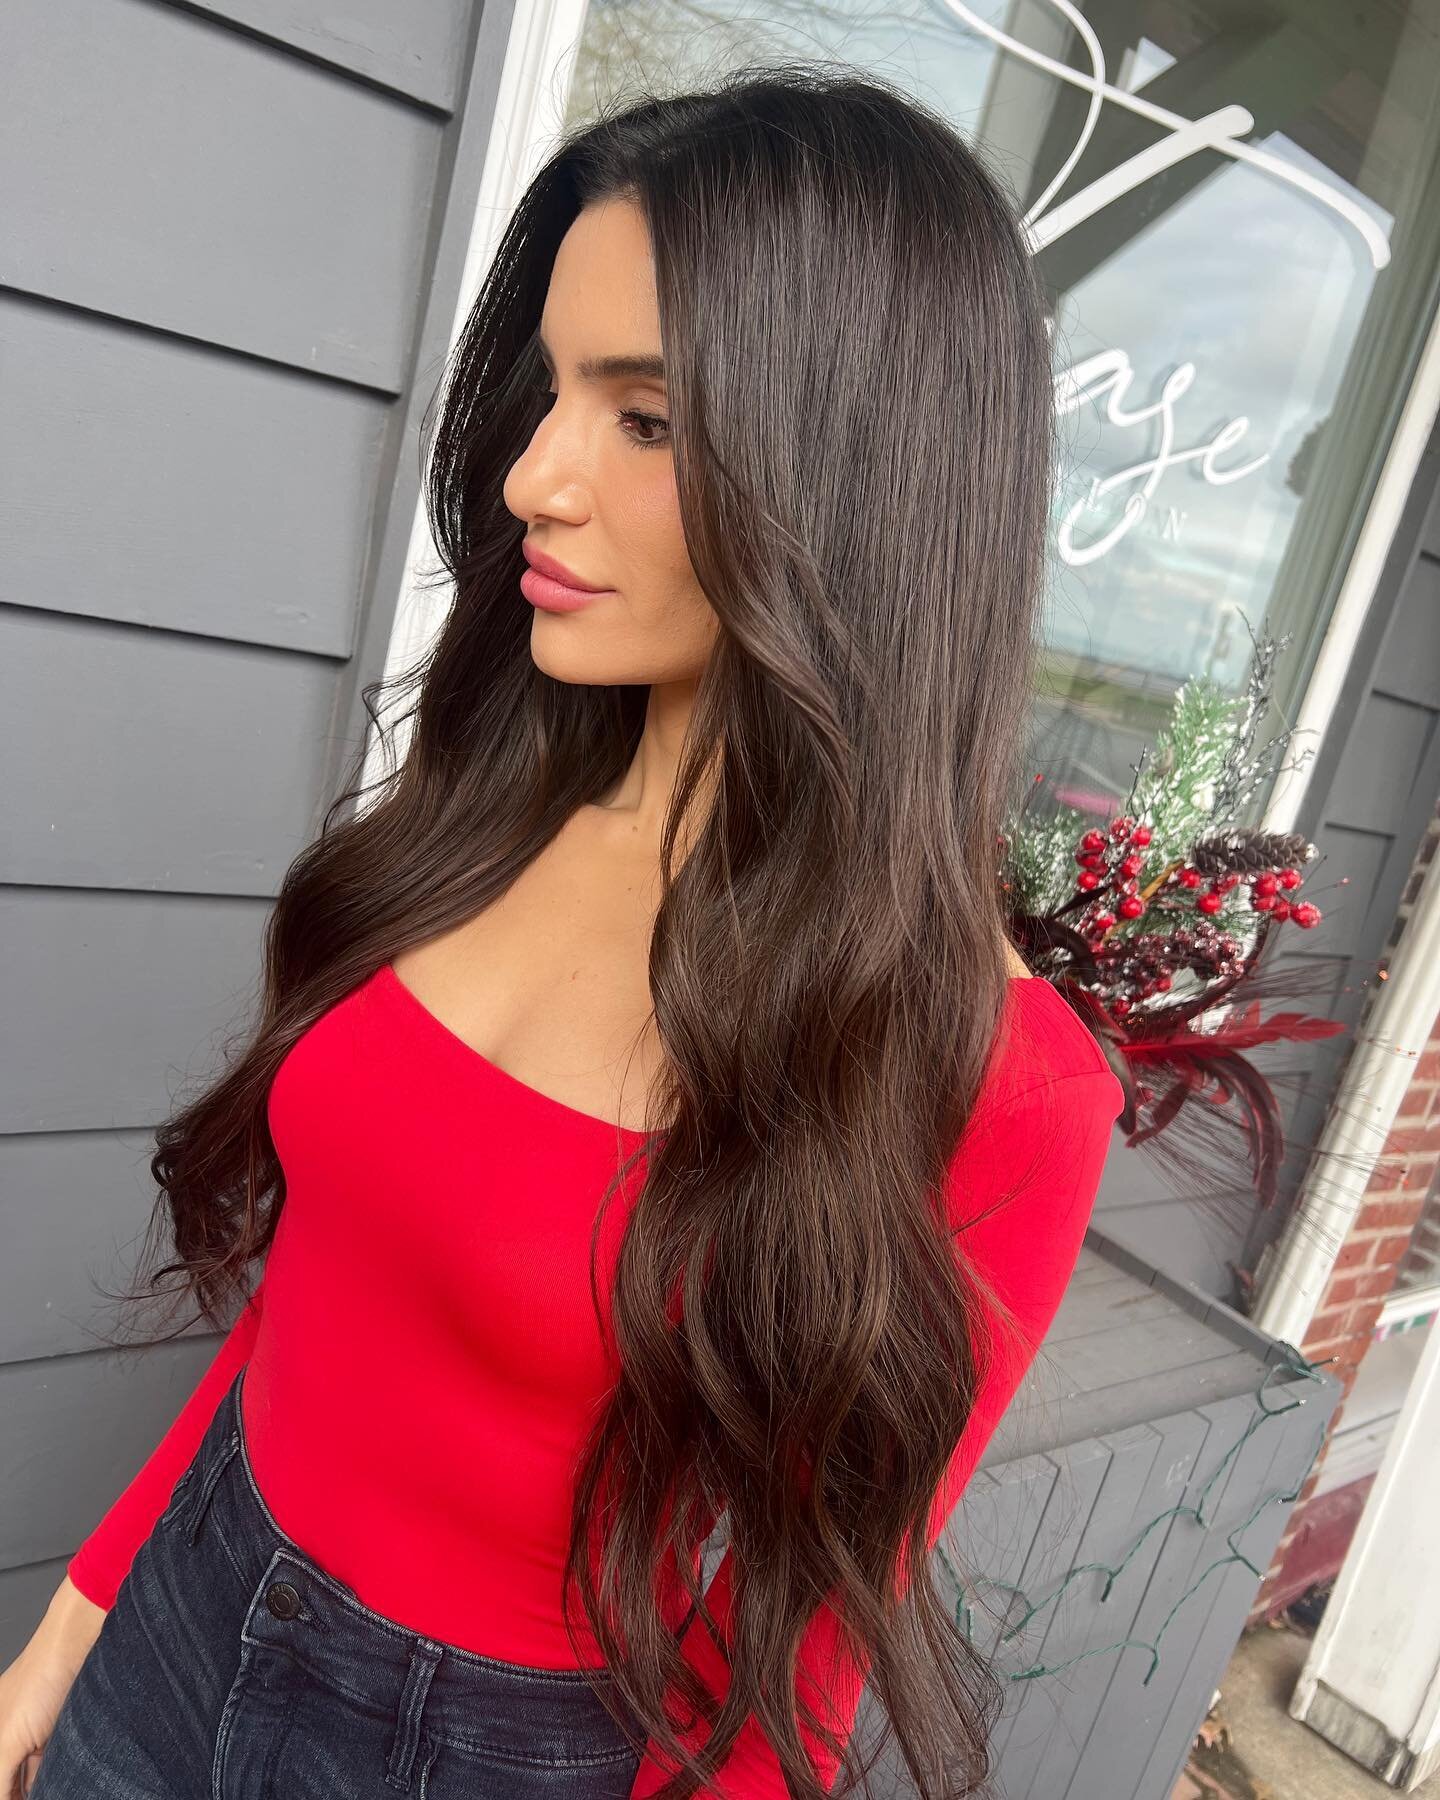 All i want for Christmas is some new 24 inch hair extensions 🤎🎅🏼
-
Volume weft by Cecilia @hairbyceciliam 
-
TEXT TO BOOK 302-379-7876
-

#teasesalonde #delawarehairstylist #delawarehairextensions #bellamihair #bellamipro #volumeweft #handtiedexte